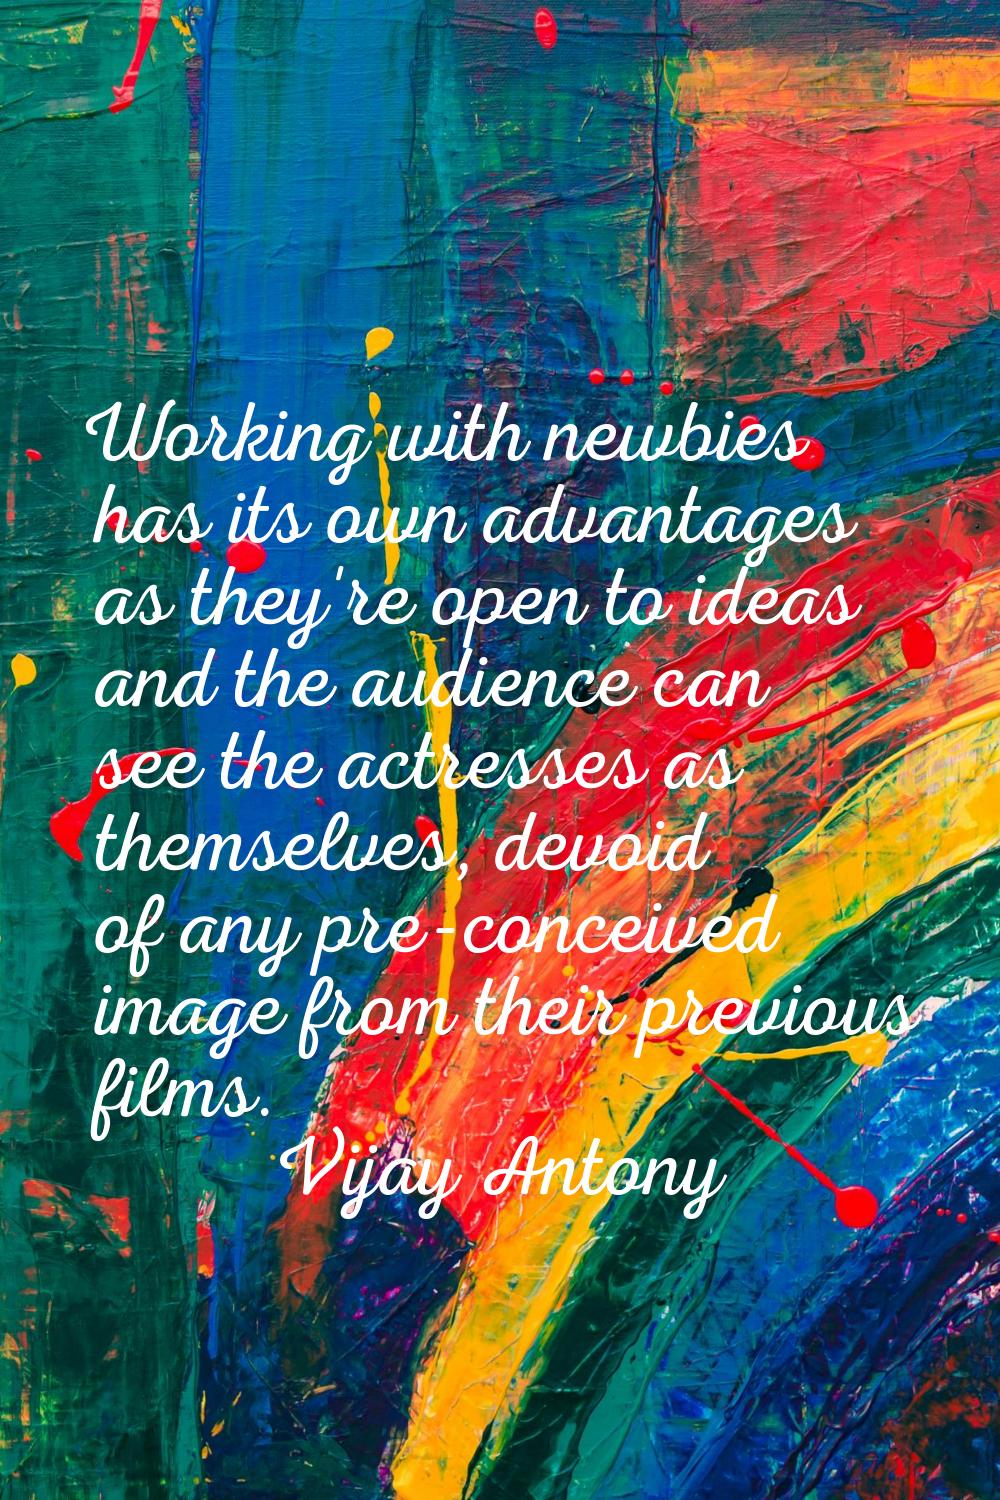 Working with newbies has its own advantages as they're open to ideas and the audience can see the a